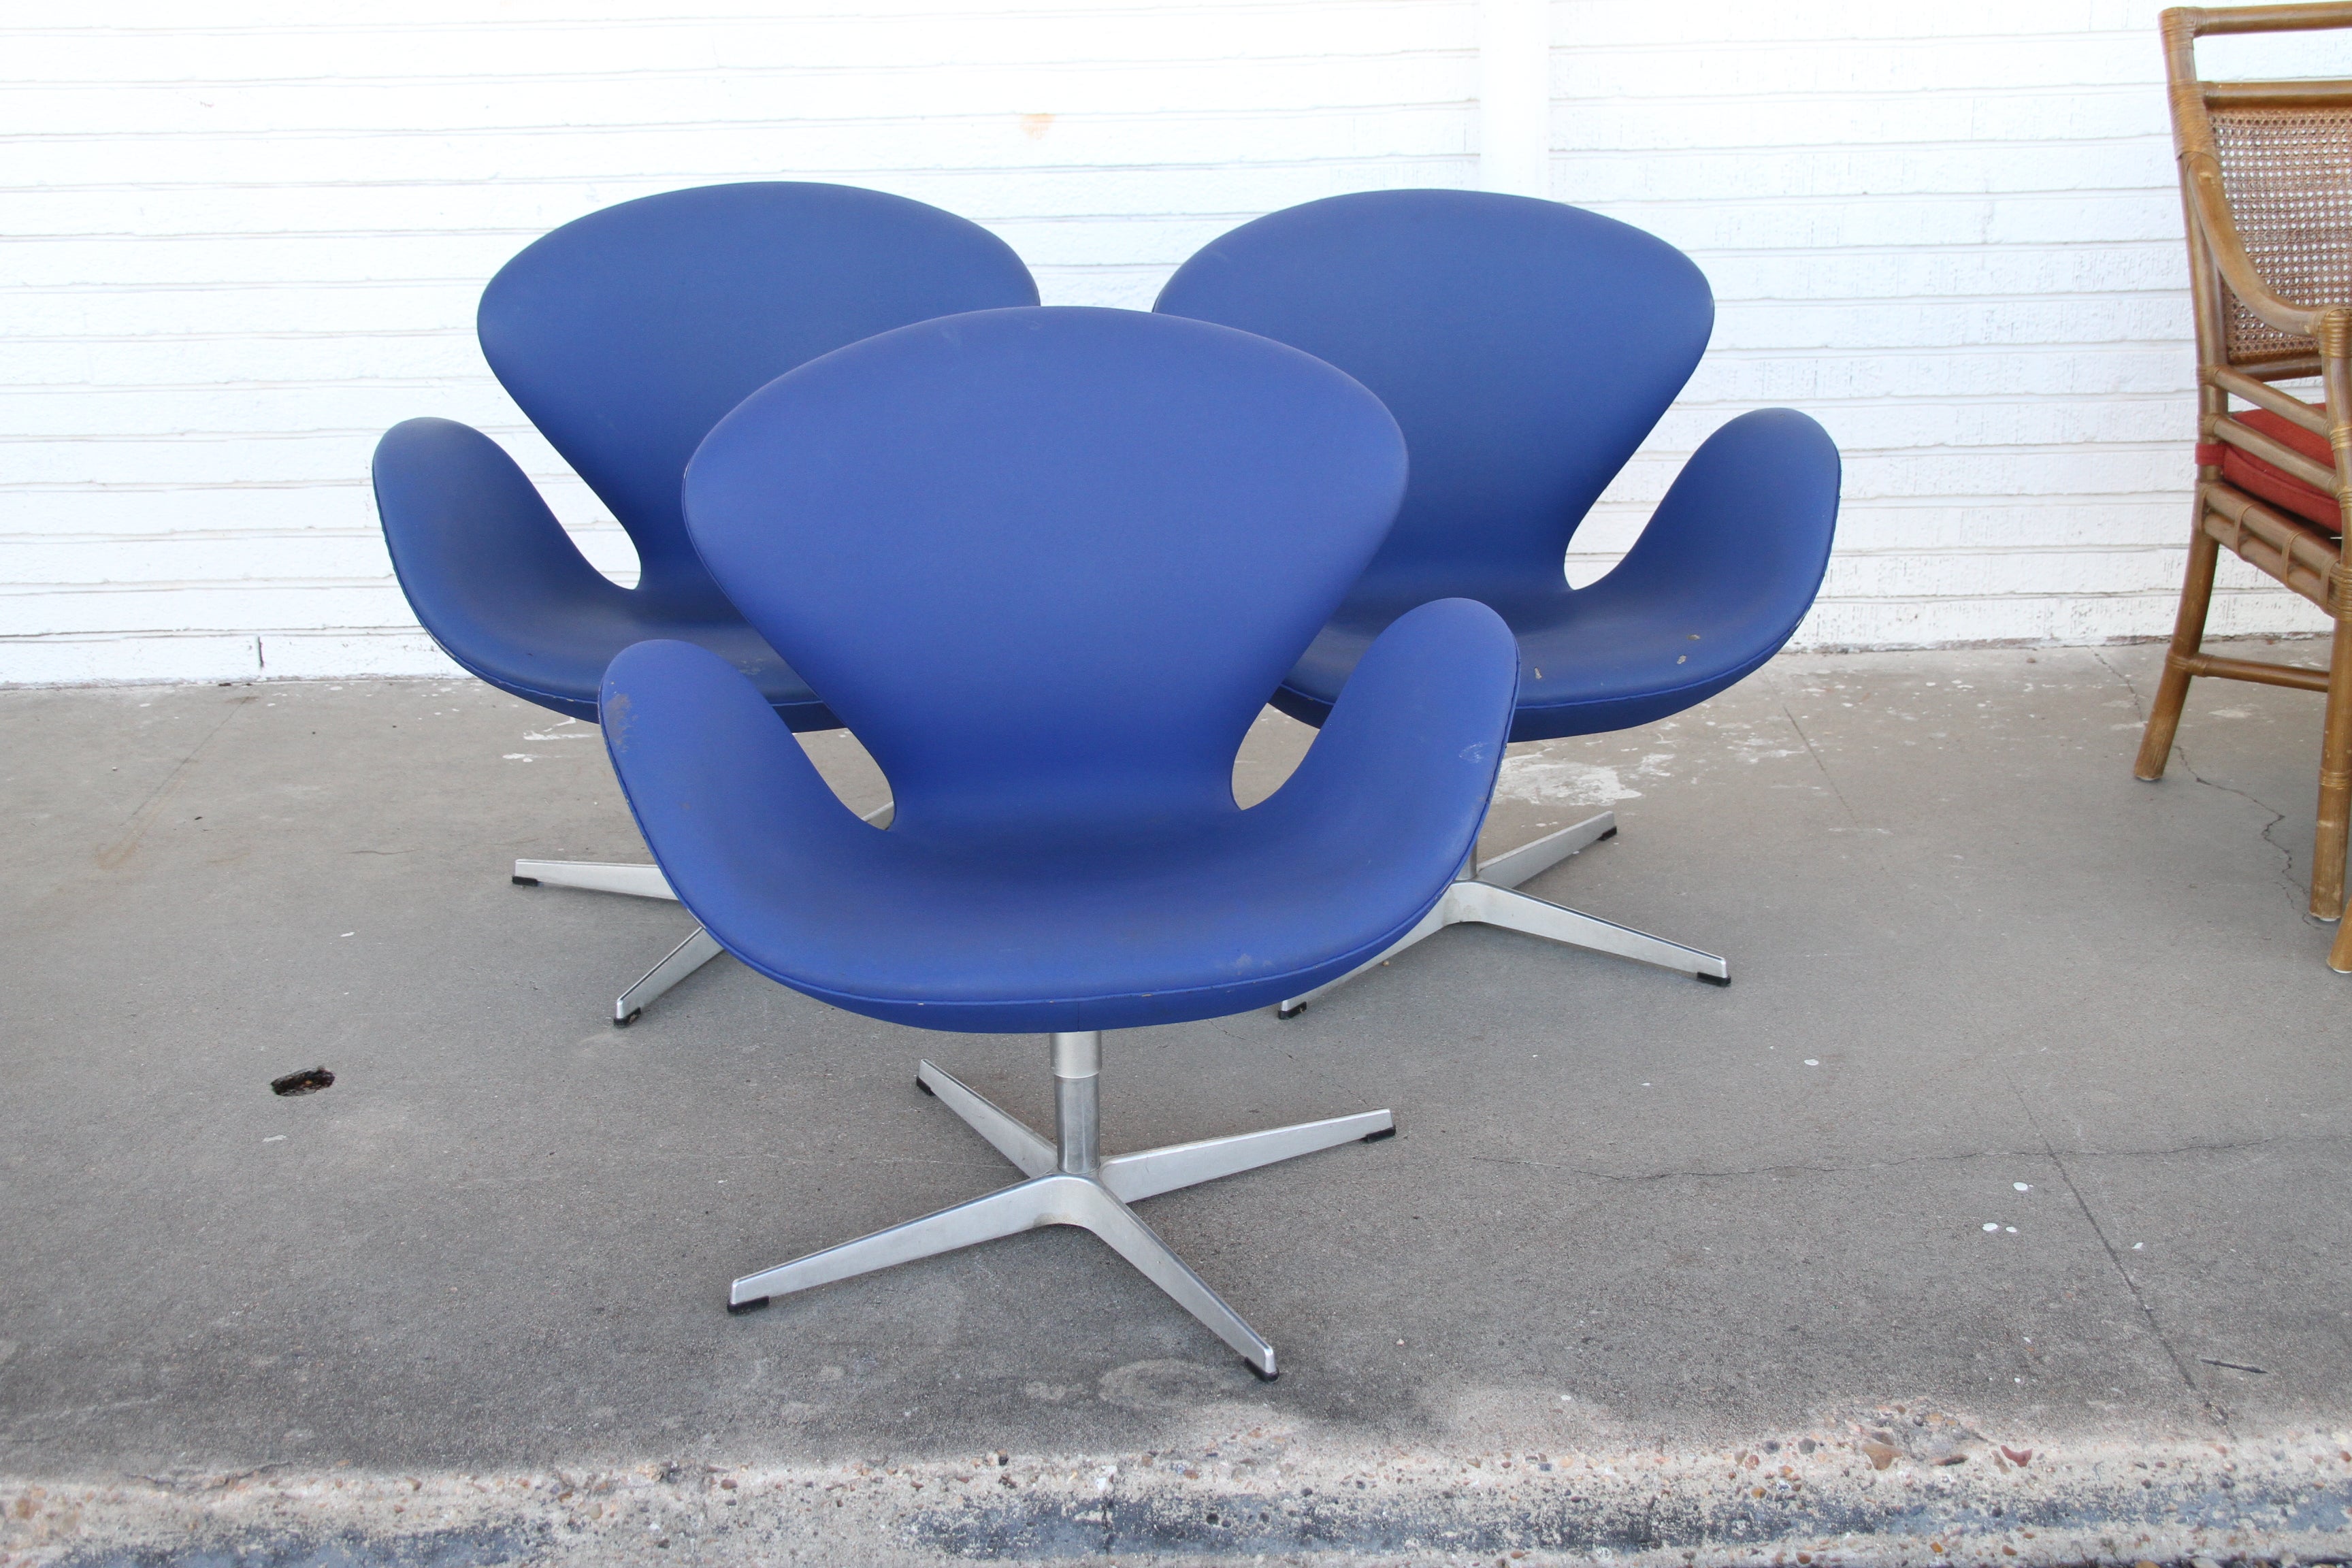 1 Arne Jacobsen swan chair.

Design Arne Jacobsen, 1958.


Designed for the SAS Royal Hotel in Copenhagen, for which designer Arne Jacobsen was the architect, the Swan Chair (1958) permitted guests to spin on its swivel base, thus becoming active